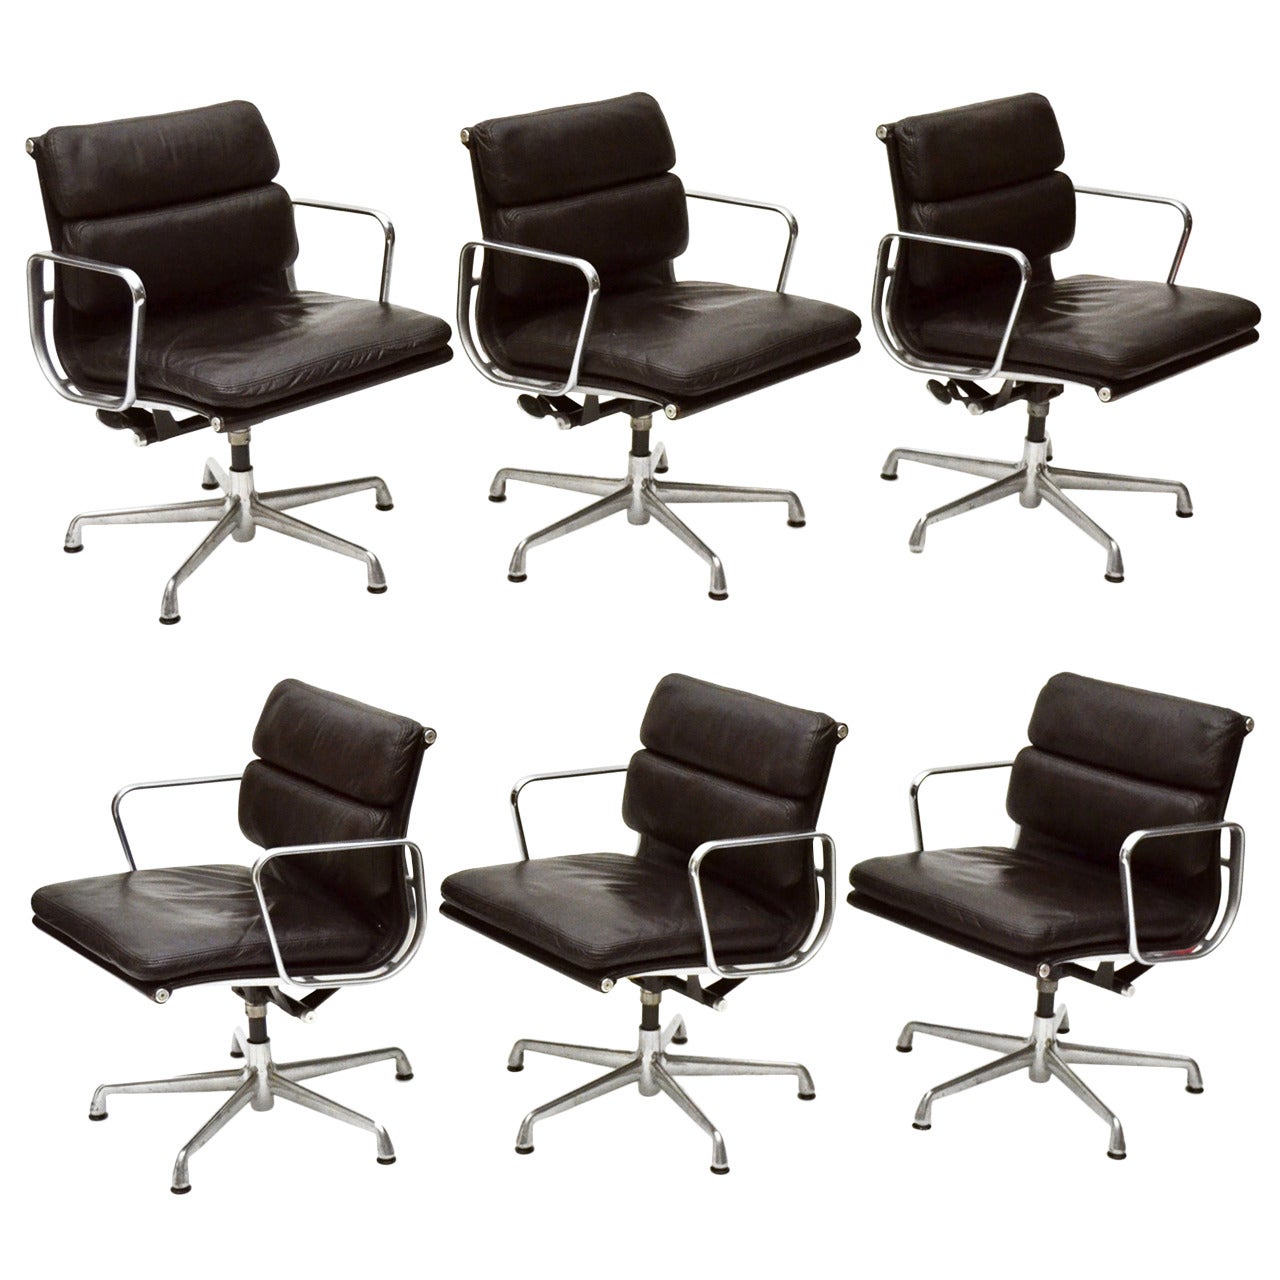 Charles and Ray Eames Set of Six Soft Pad Chairs by Herman Miller